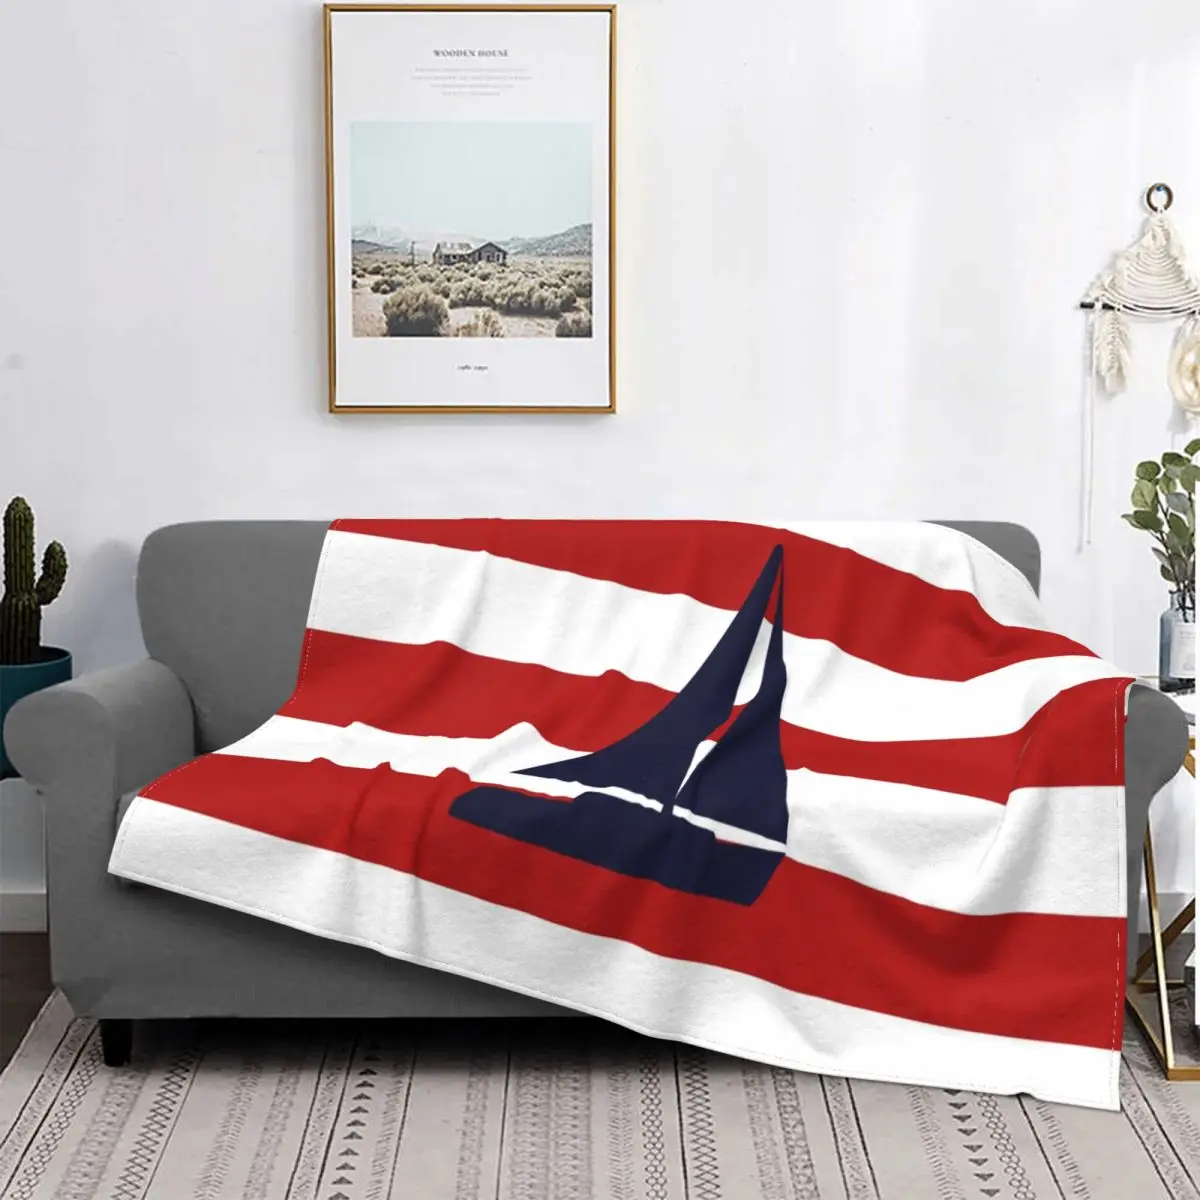 

Nautical Navy Blue Blanket 3D Print Soft Flannel Fleece Warm Sailboat On Red Stripes Throw Blankets for Car Bed Couch Bedspreads